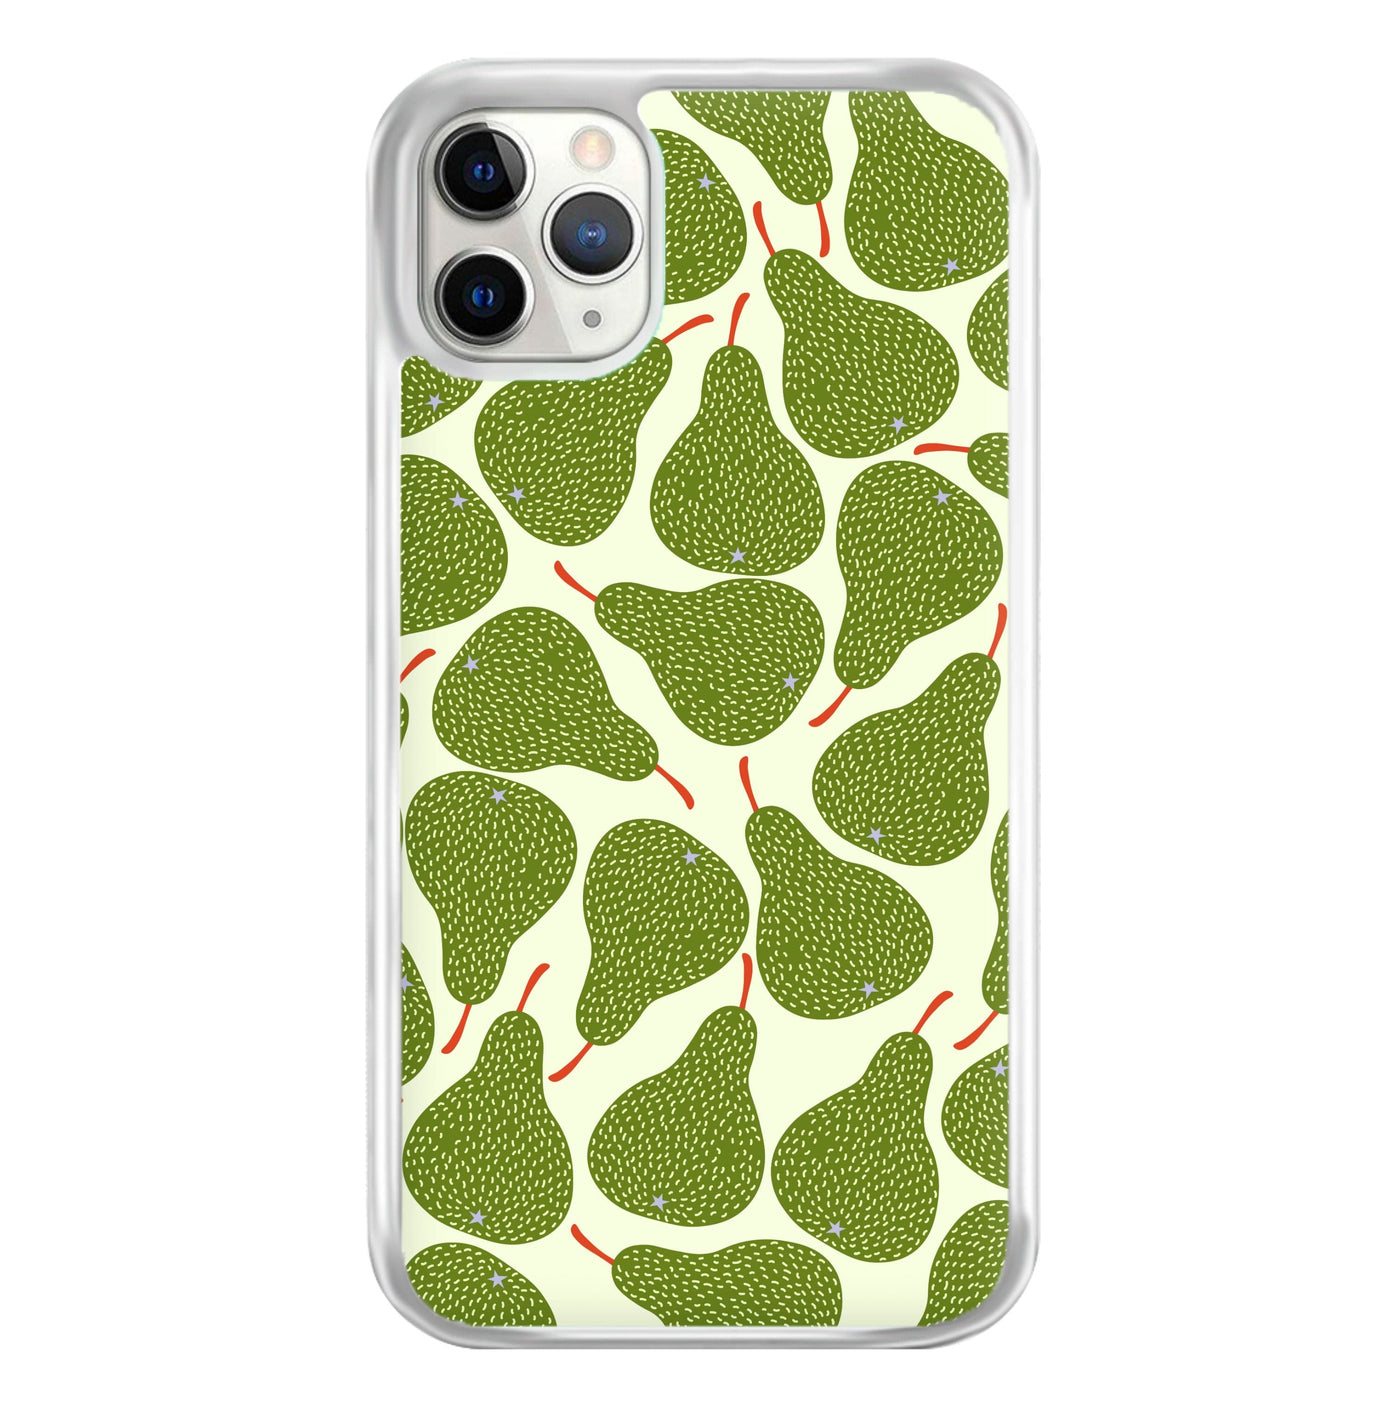 Pears - Fruit Patterns Phone Case